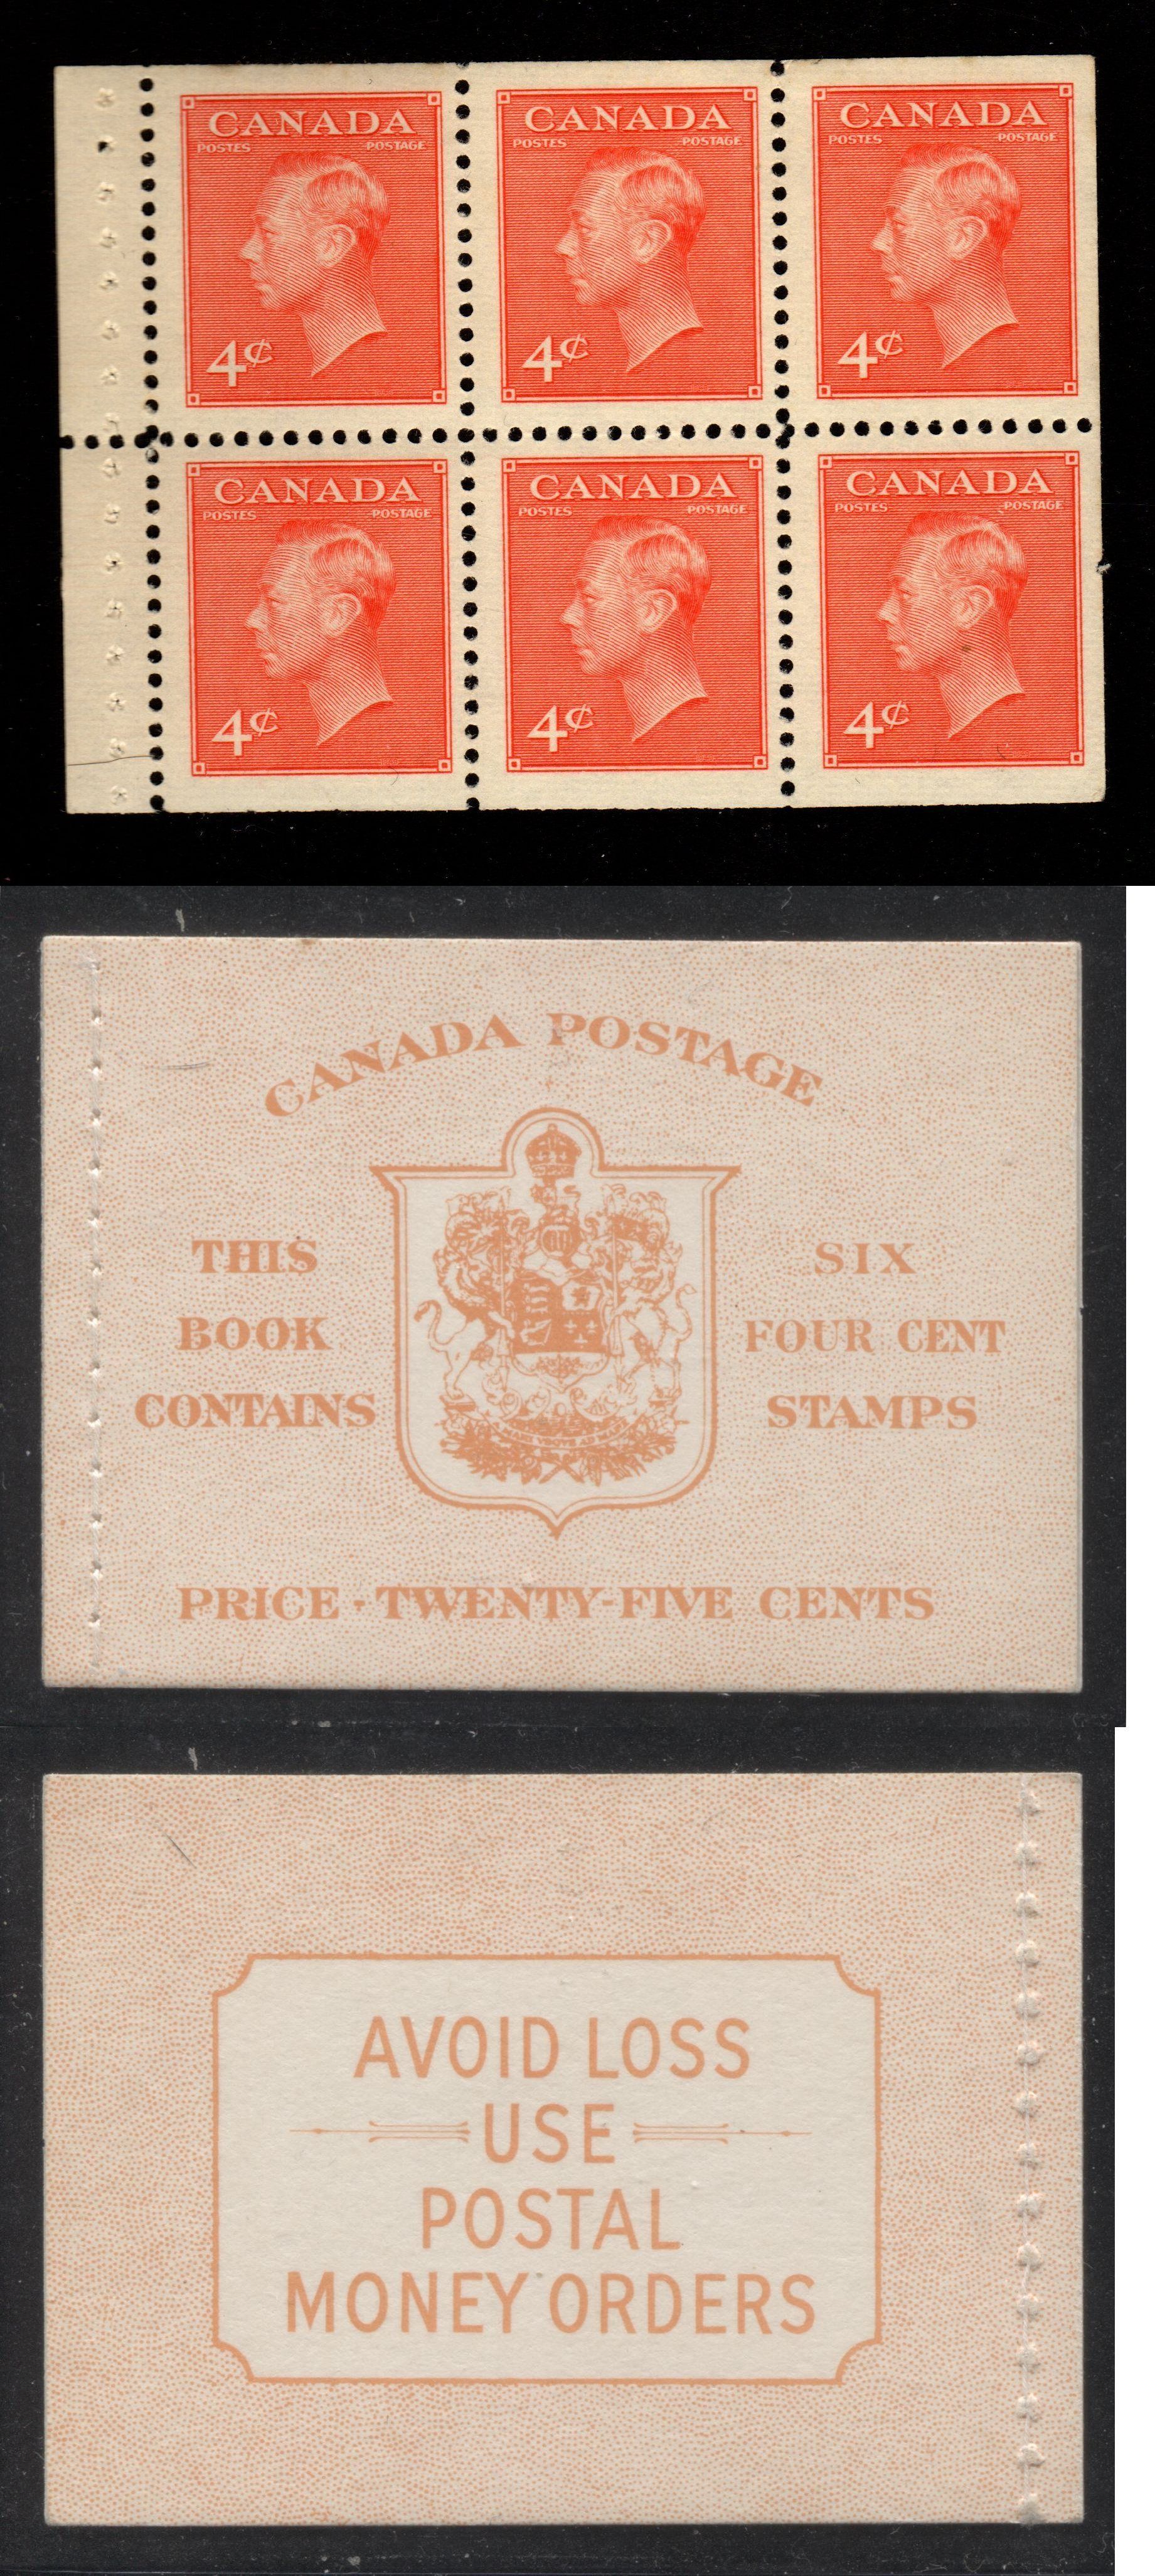 Canada #BK42b 1949-1953 Postes-Postage Issue Complete 25c, English Booklet Containing 1 Pane of 6 of the 4c Orange King George VI Harris Front Cover Type IIi , Back Cover Eiv, No Rate Page, Stitched Binding Brixton Chrome 